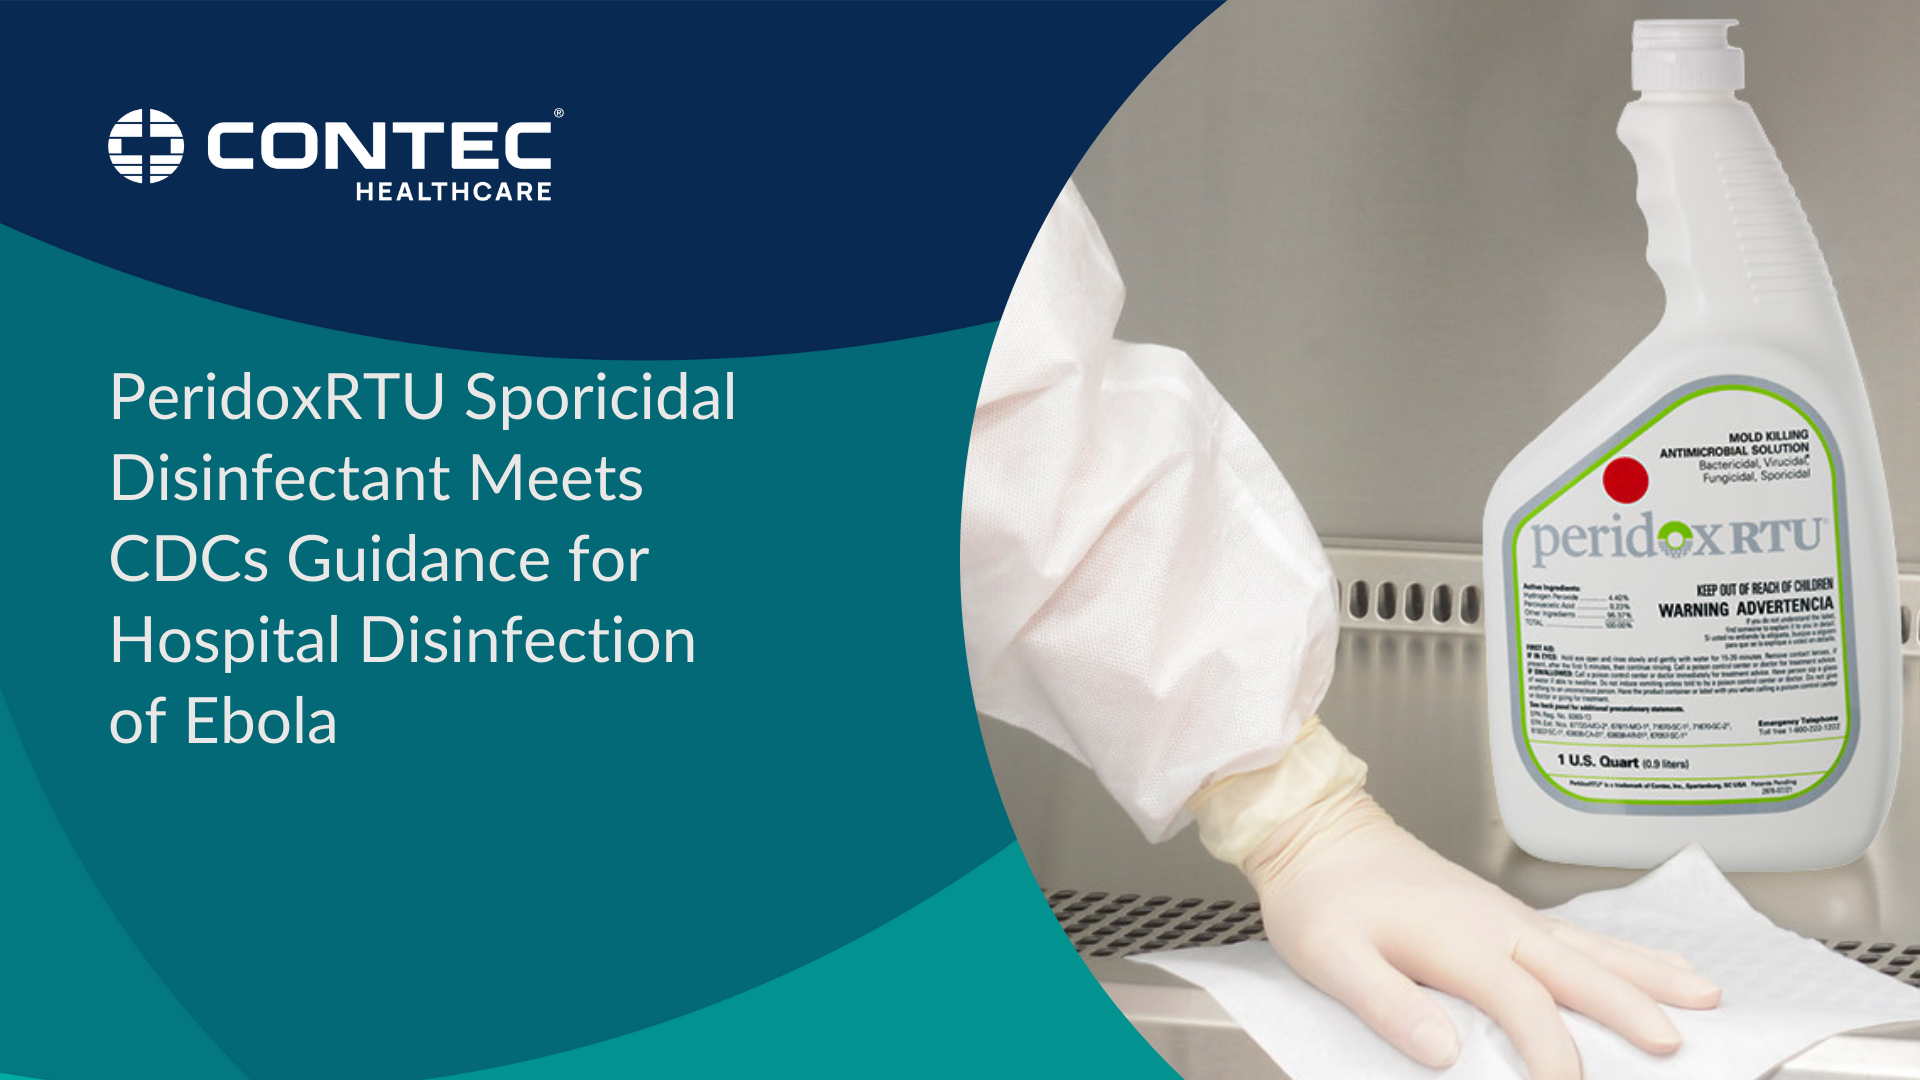 Image of PeridoxRTU Sporicidal Disinfectant Meets CDCs Guidance for Hospital Disinfection of Ebola